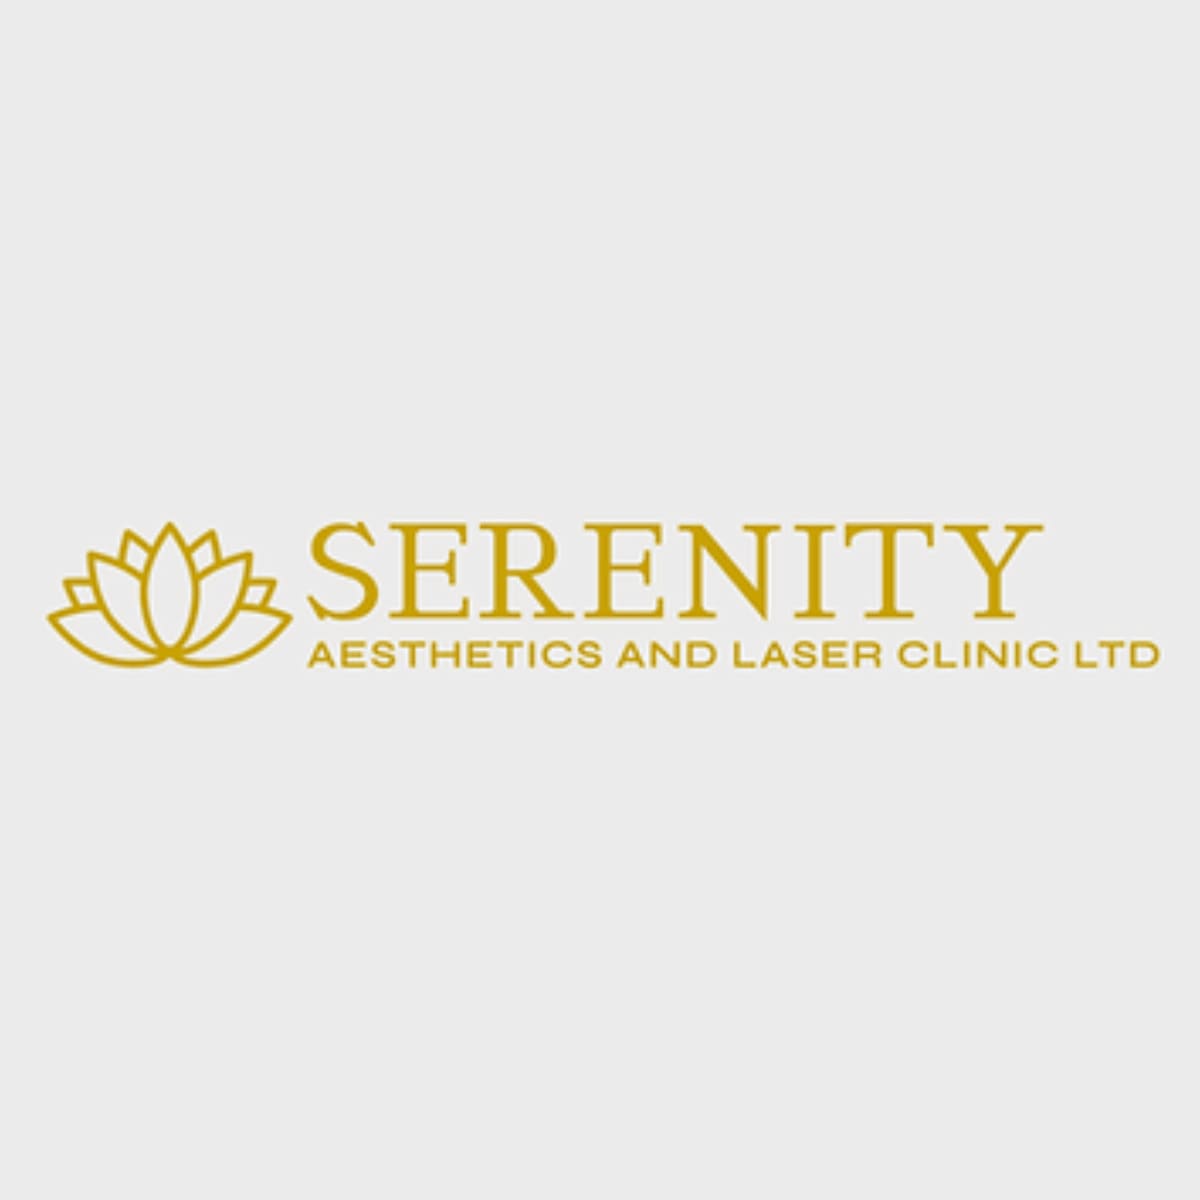 Serenity Aesthetics and Laser Clinic Ltd - Mansfield, Nottinghamshire NG18 4AA - 07888 734655 | ShowMeLocal.com